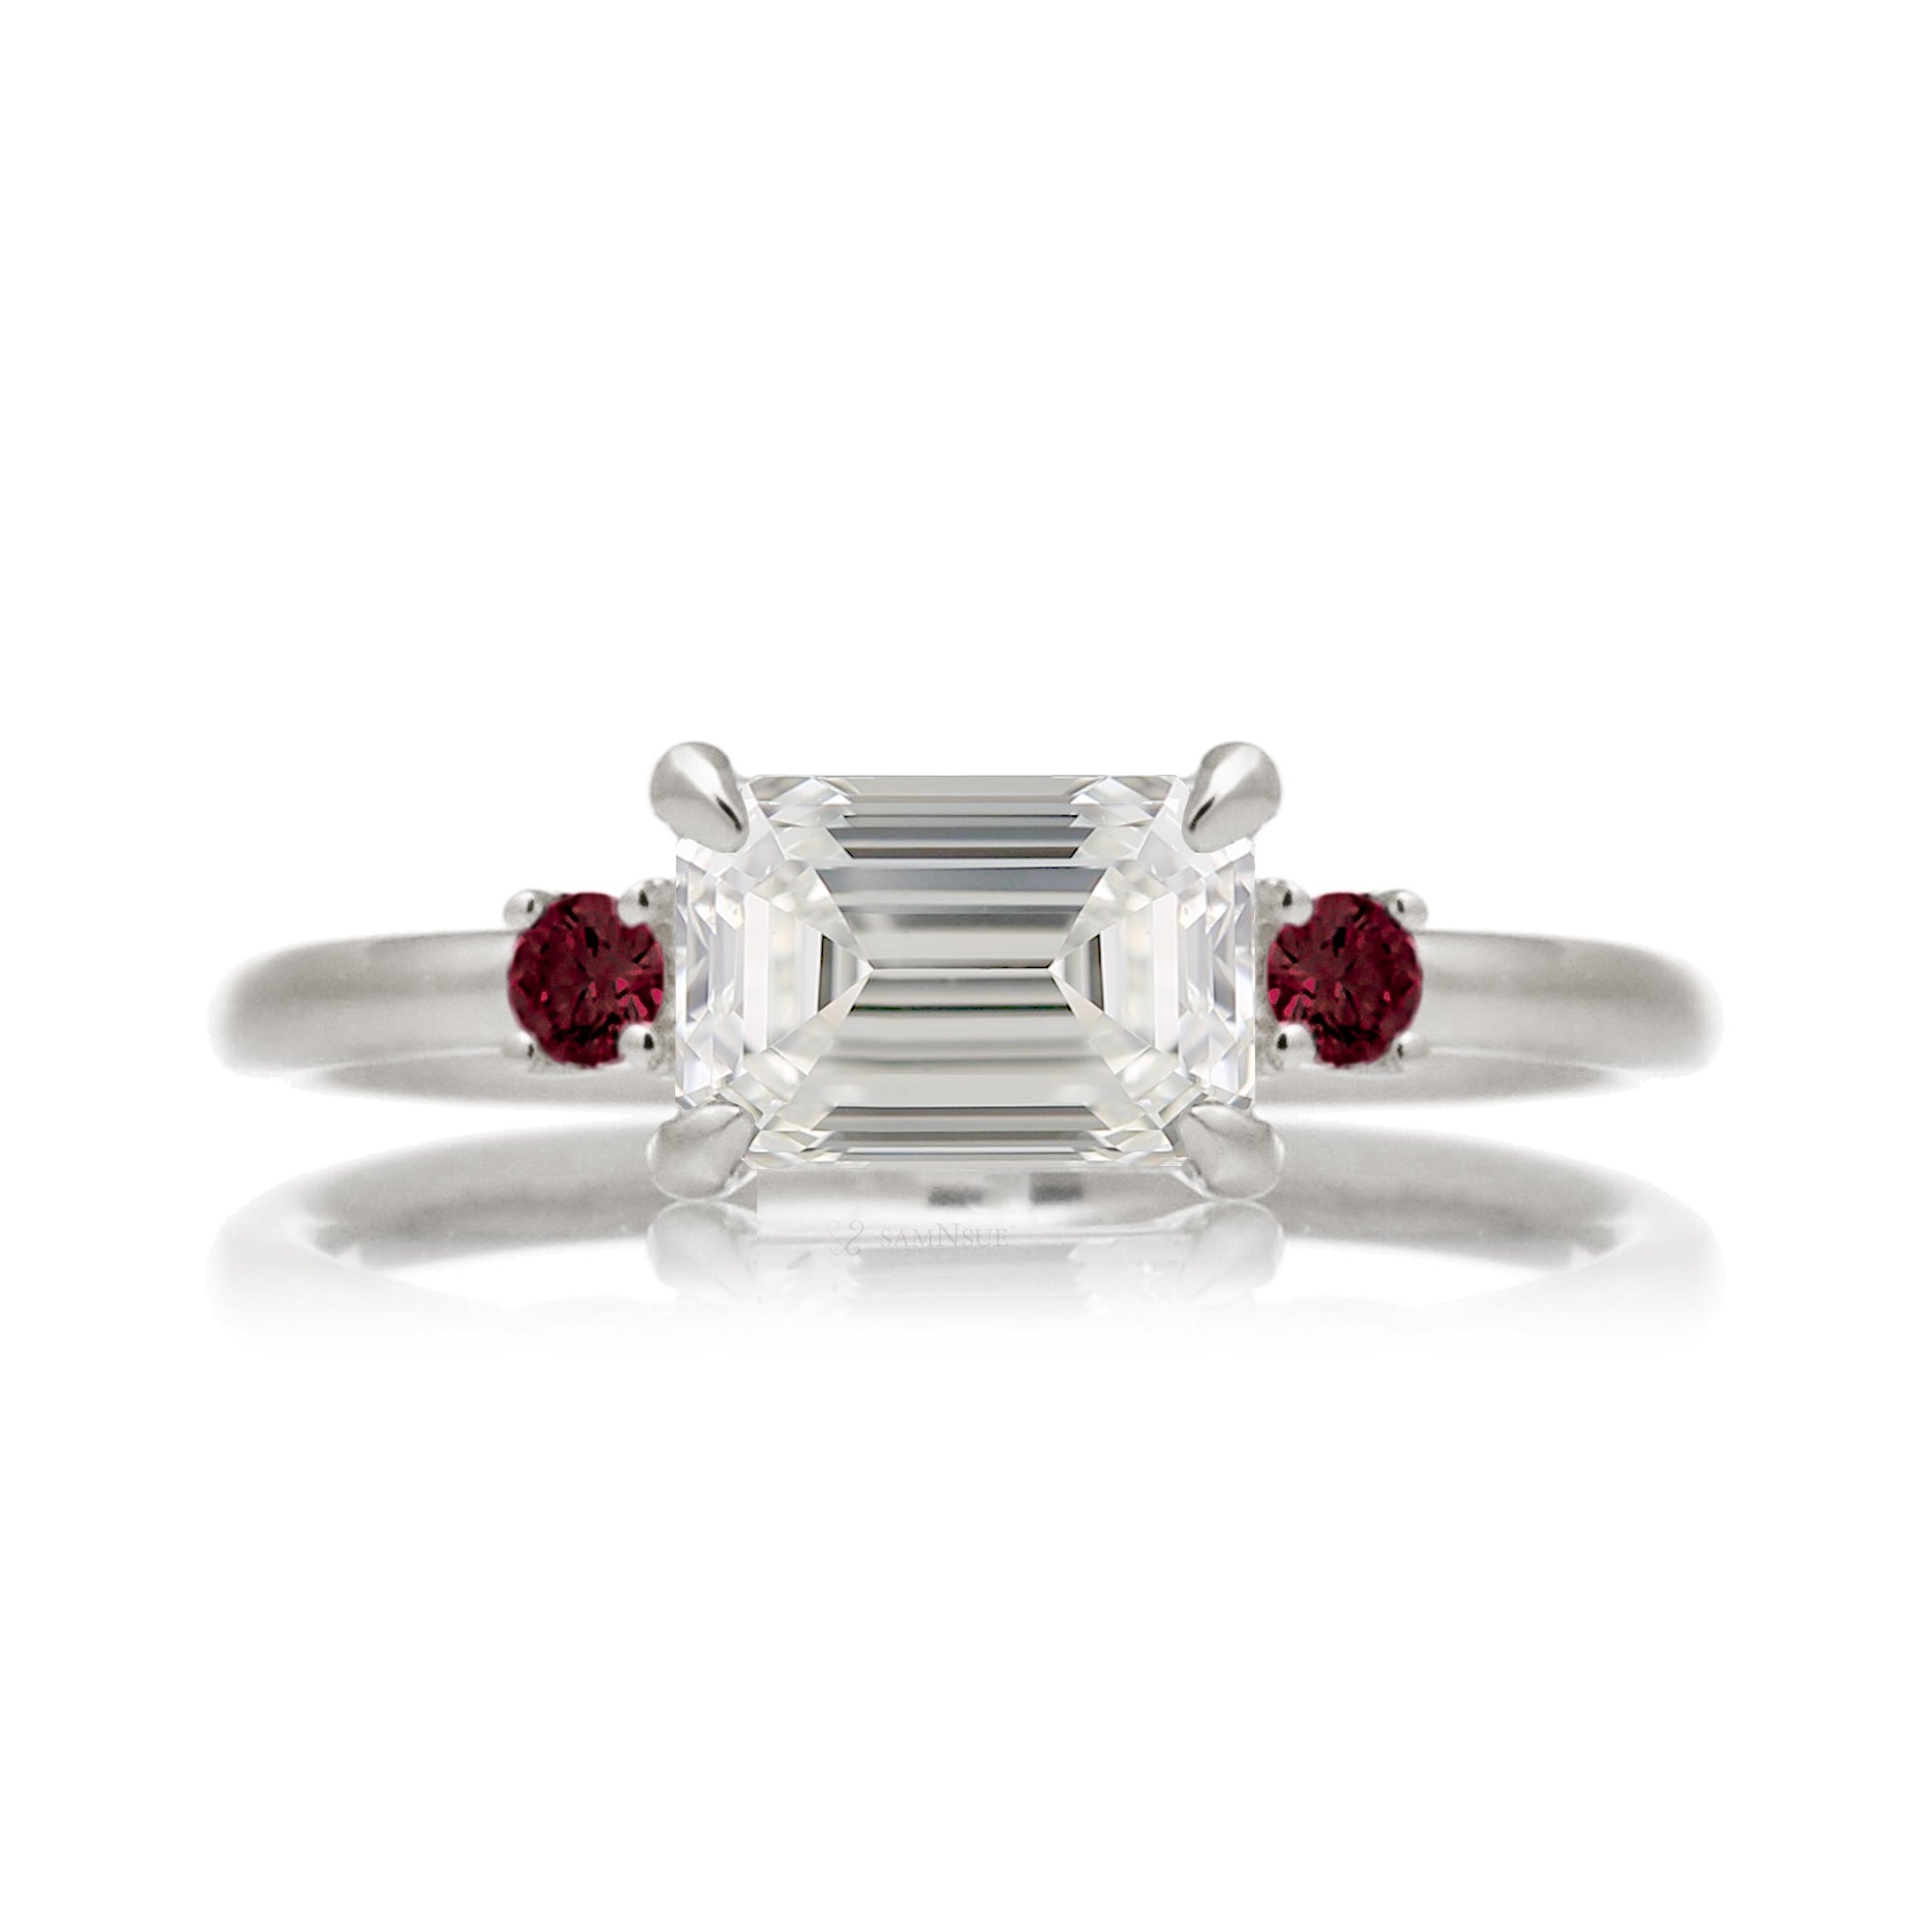 east-west emerald cut diamond three stone ring the Lena with side red rubies white gold